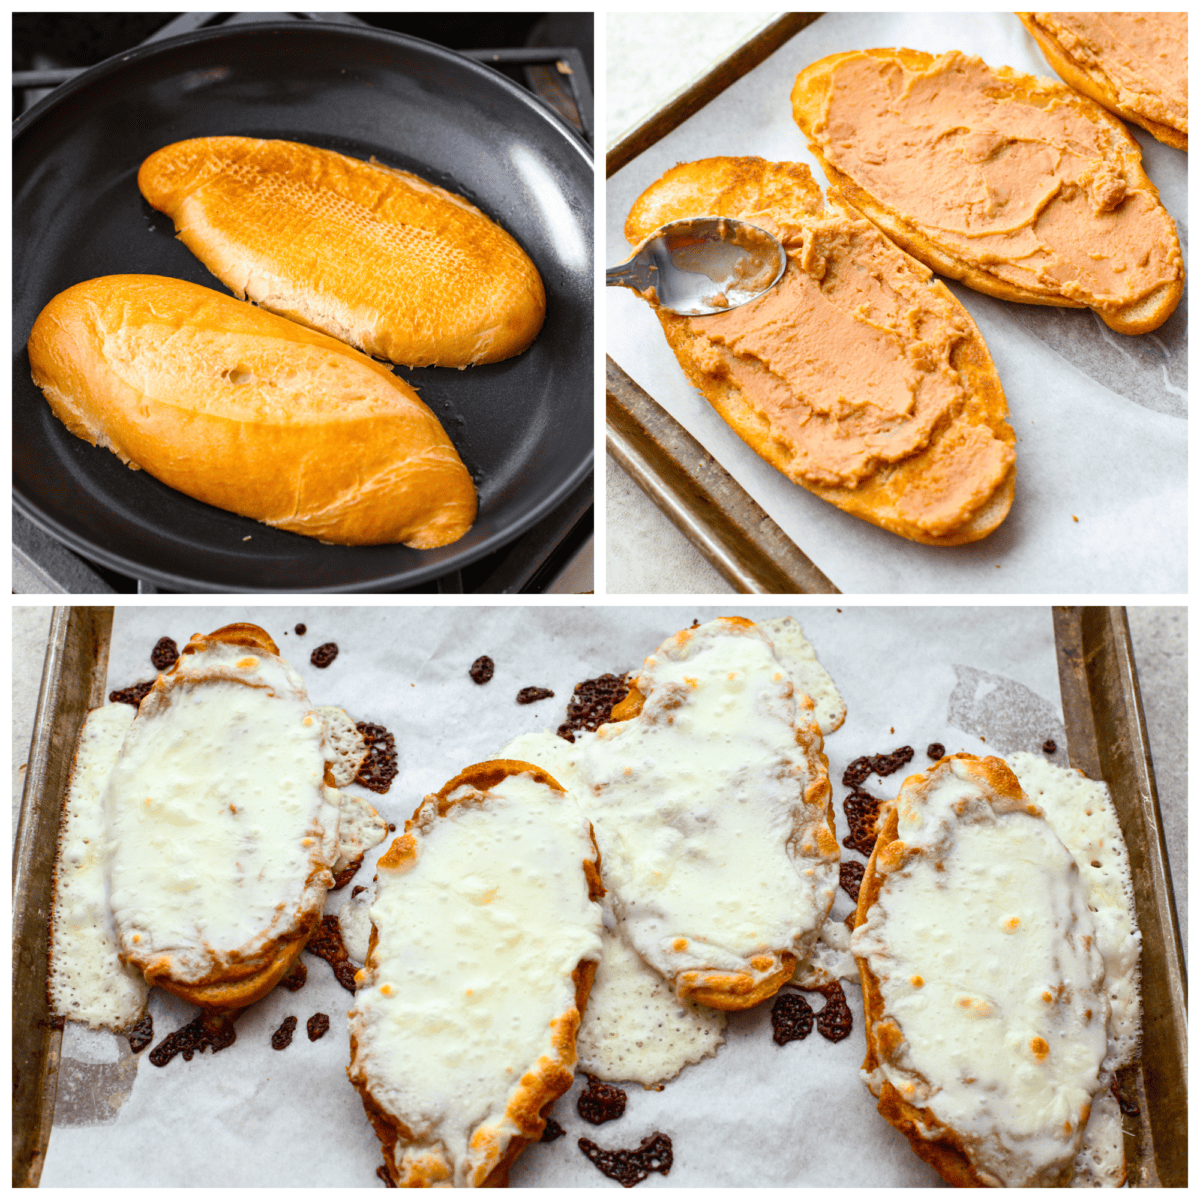 3-photo collage showing the process of preparing molletes by toasting the bread and adding various toppings.